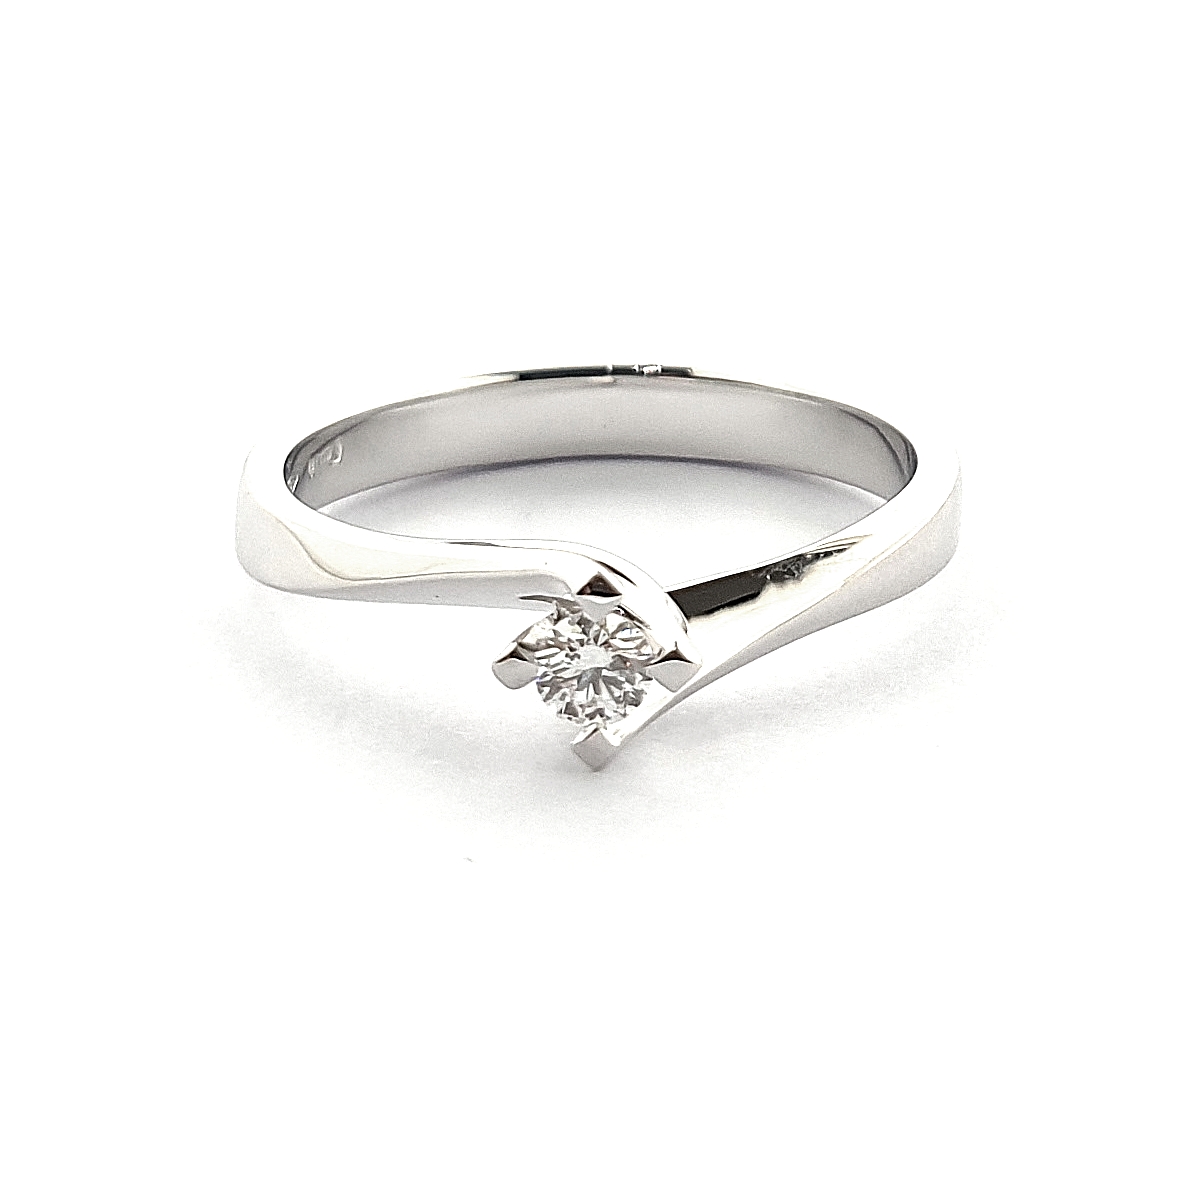 750 Mill. White Gold Ring with 0,08 Ct. F-Vs Diamond